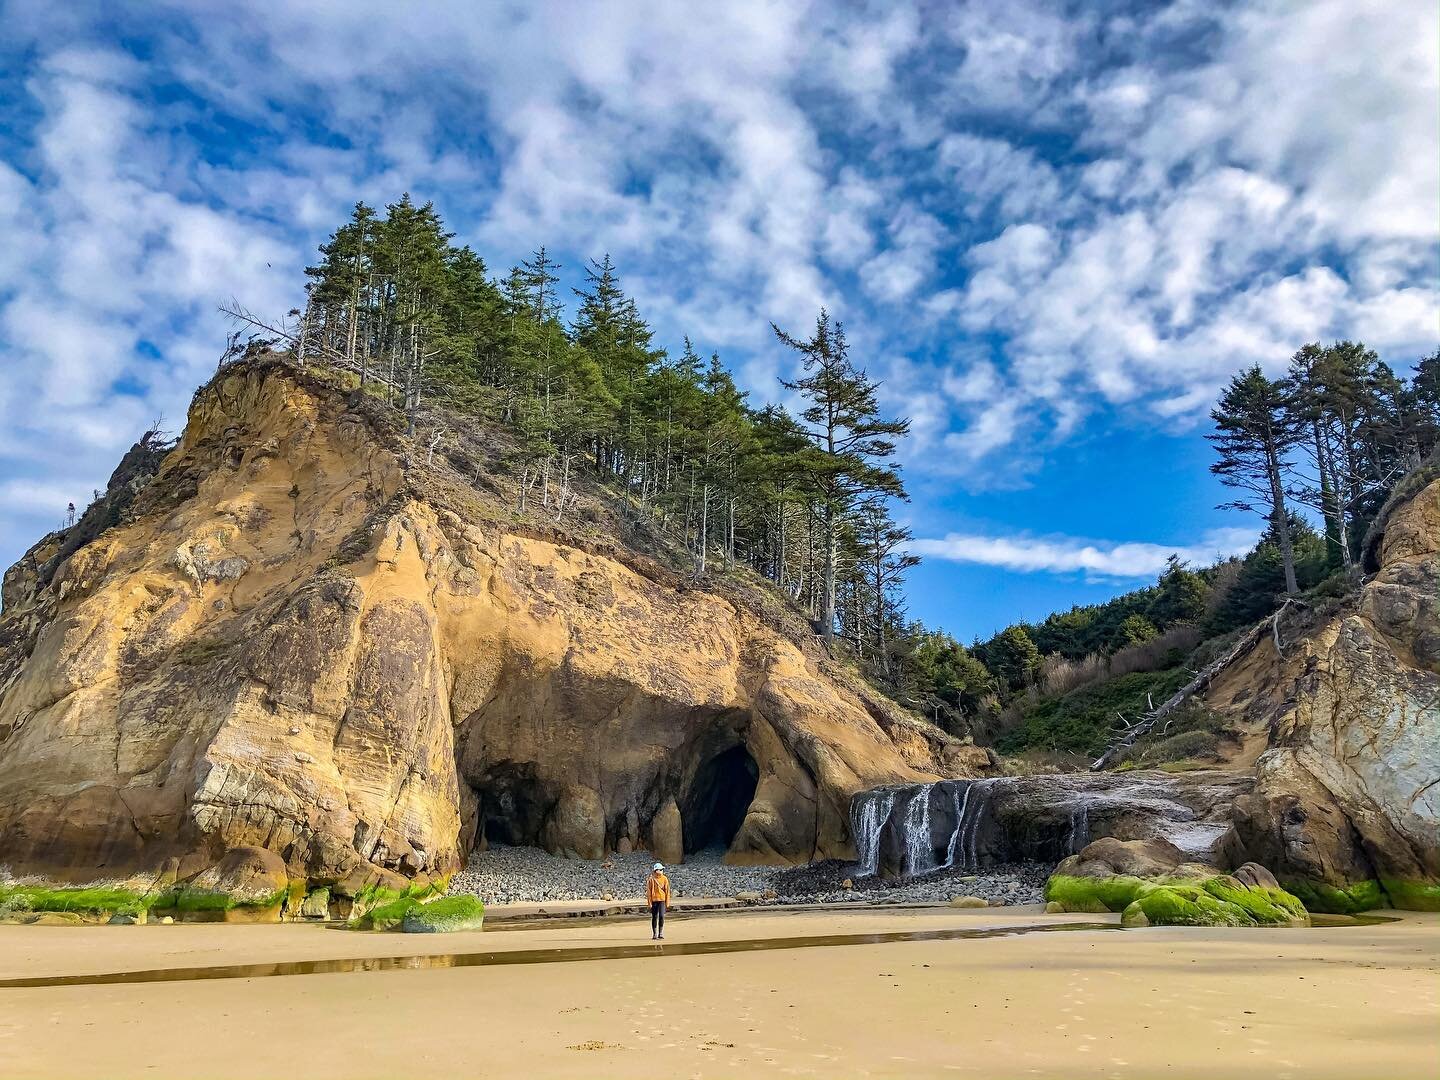 You know what&rsquo;s a great destination no matter what time of year? The Oregon coast. I don&rsquo;t know what it is about being near the ocean but it instantly grounds and calms me. This is one of my favorite spots on the coast near Portland, Hug 